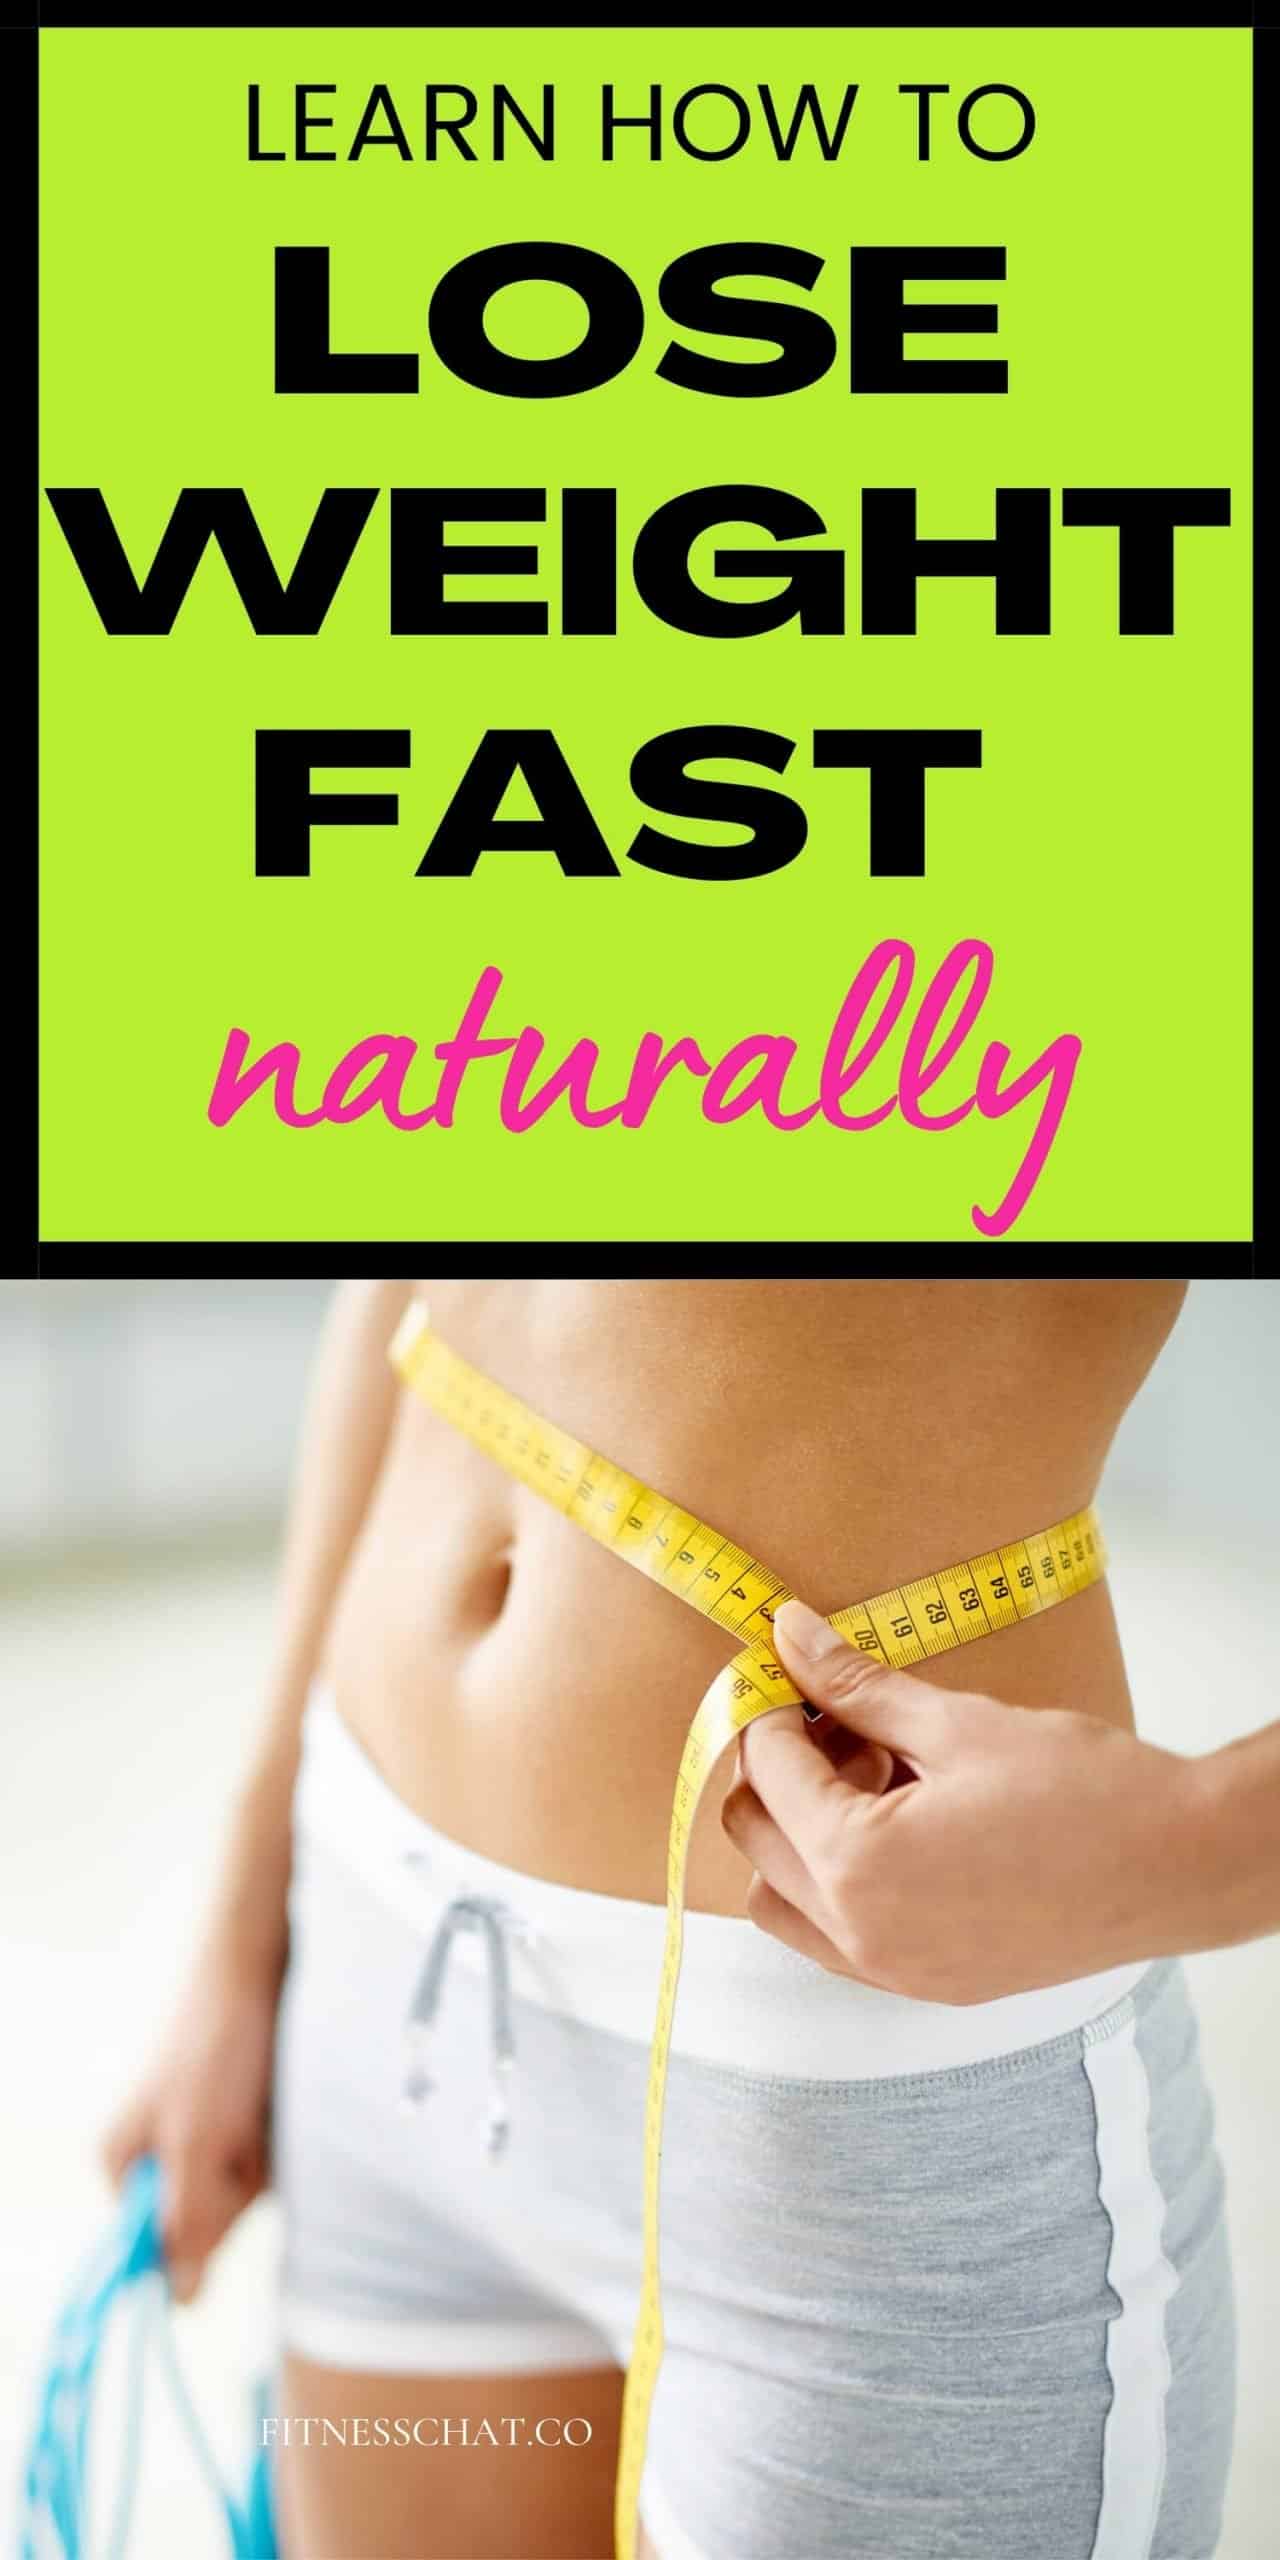 How To Lose Weight Fast Naturally And Permanently In 10 Easy Steps